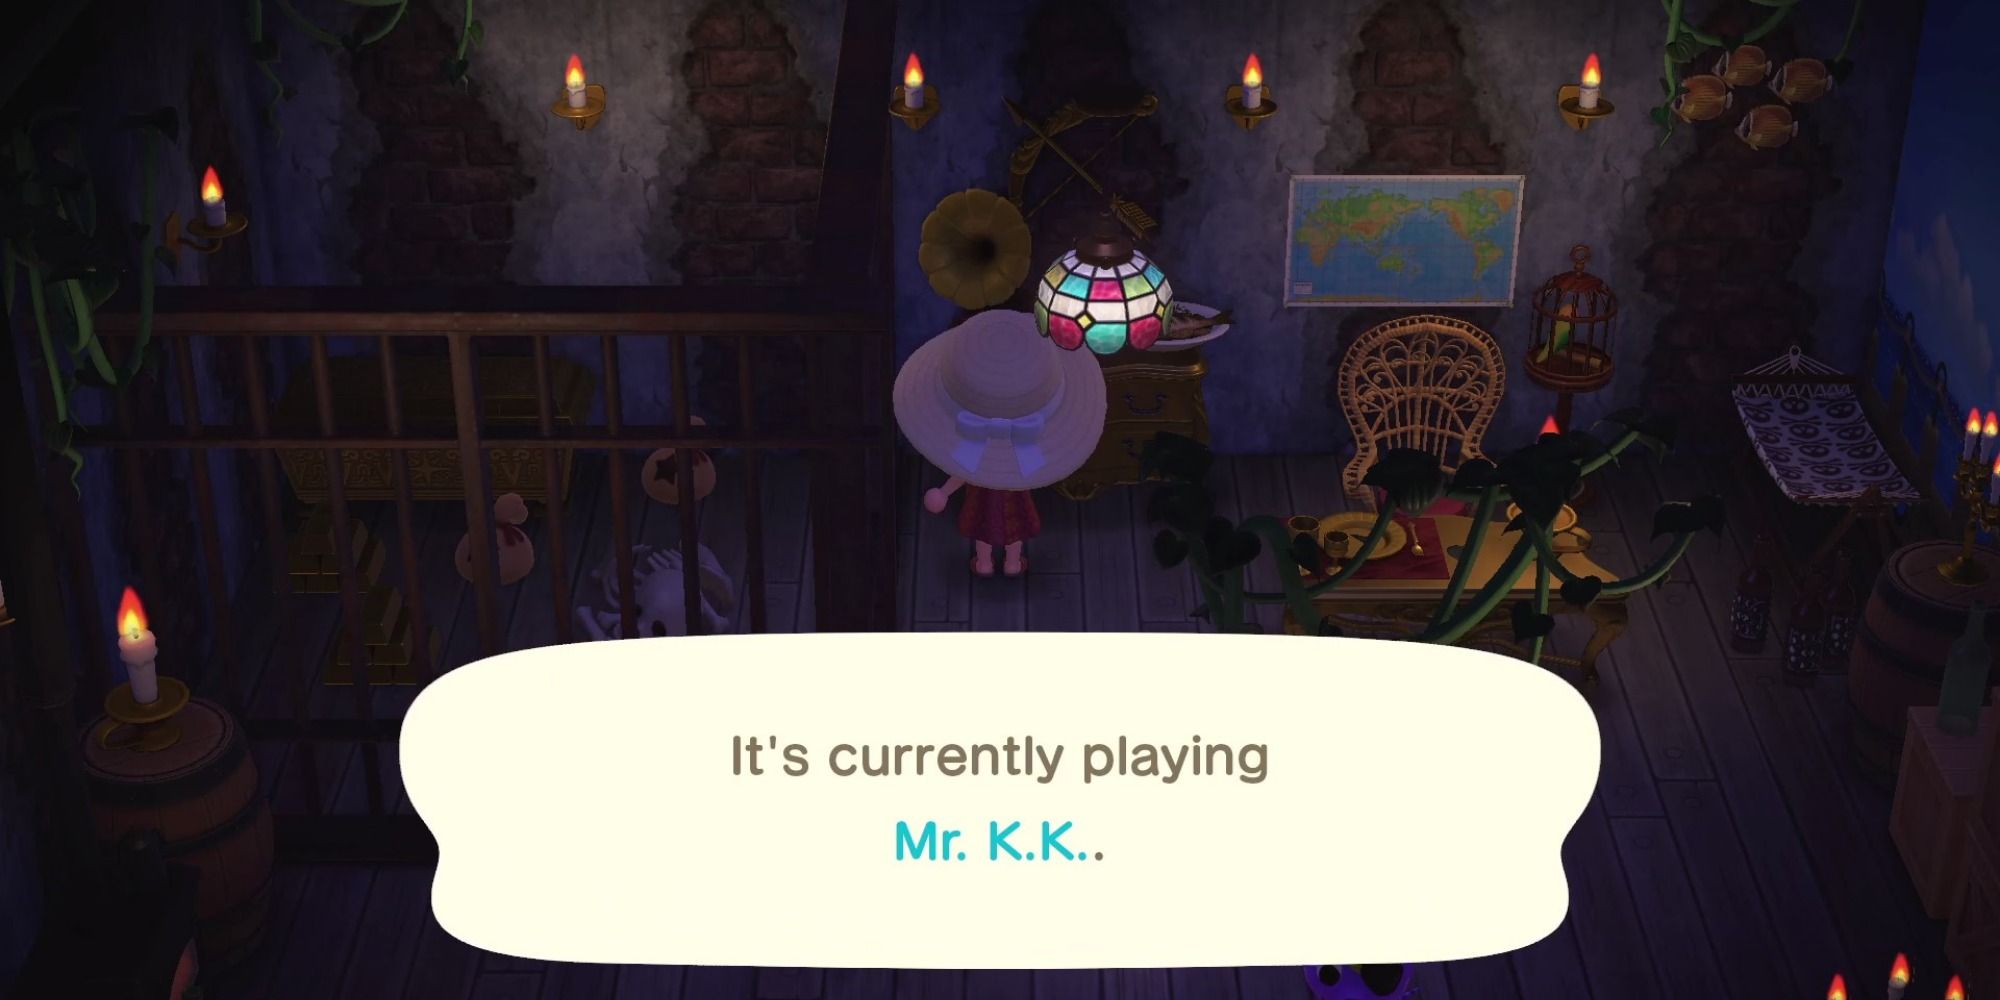 A player stands in a dark room in front of a record player, which says it is currently playing the song "Mr. K.K."